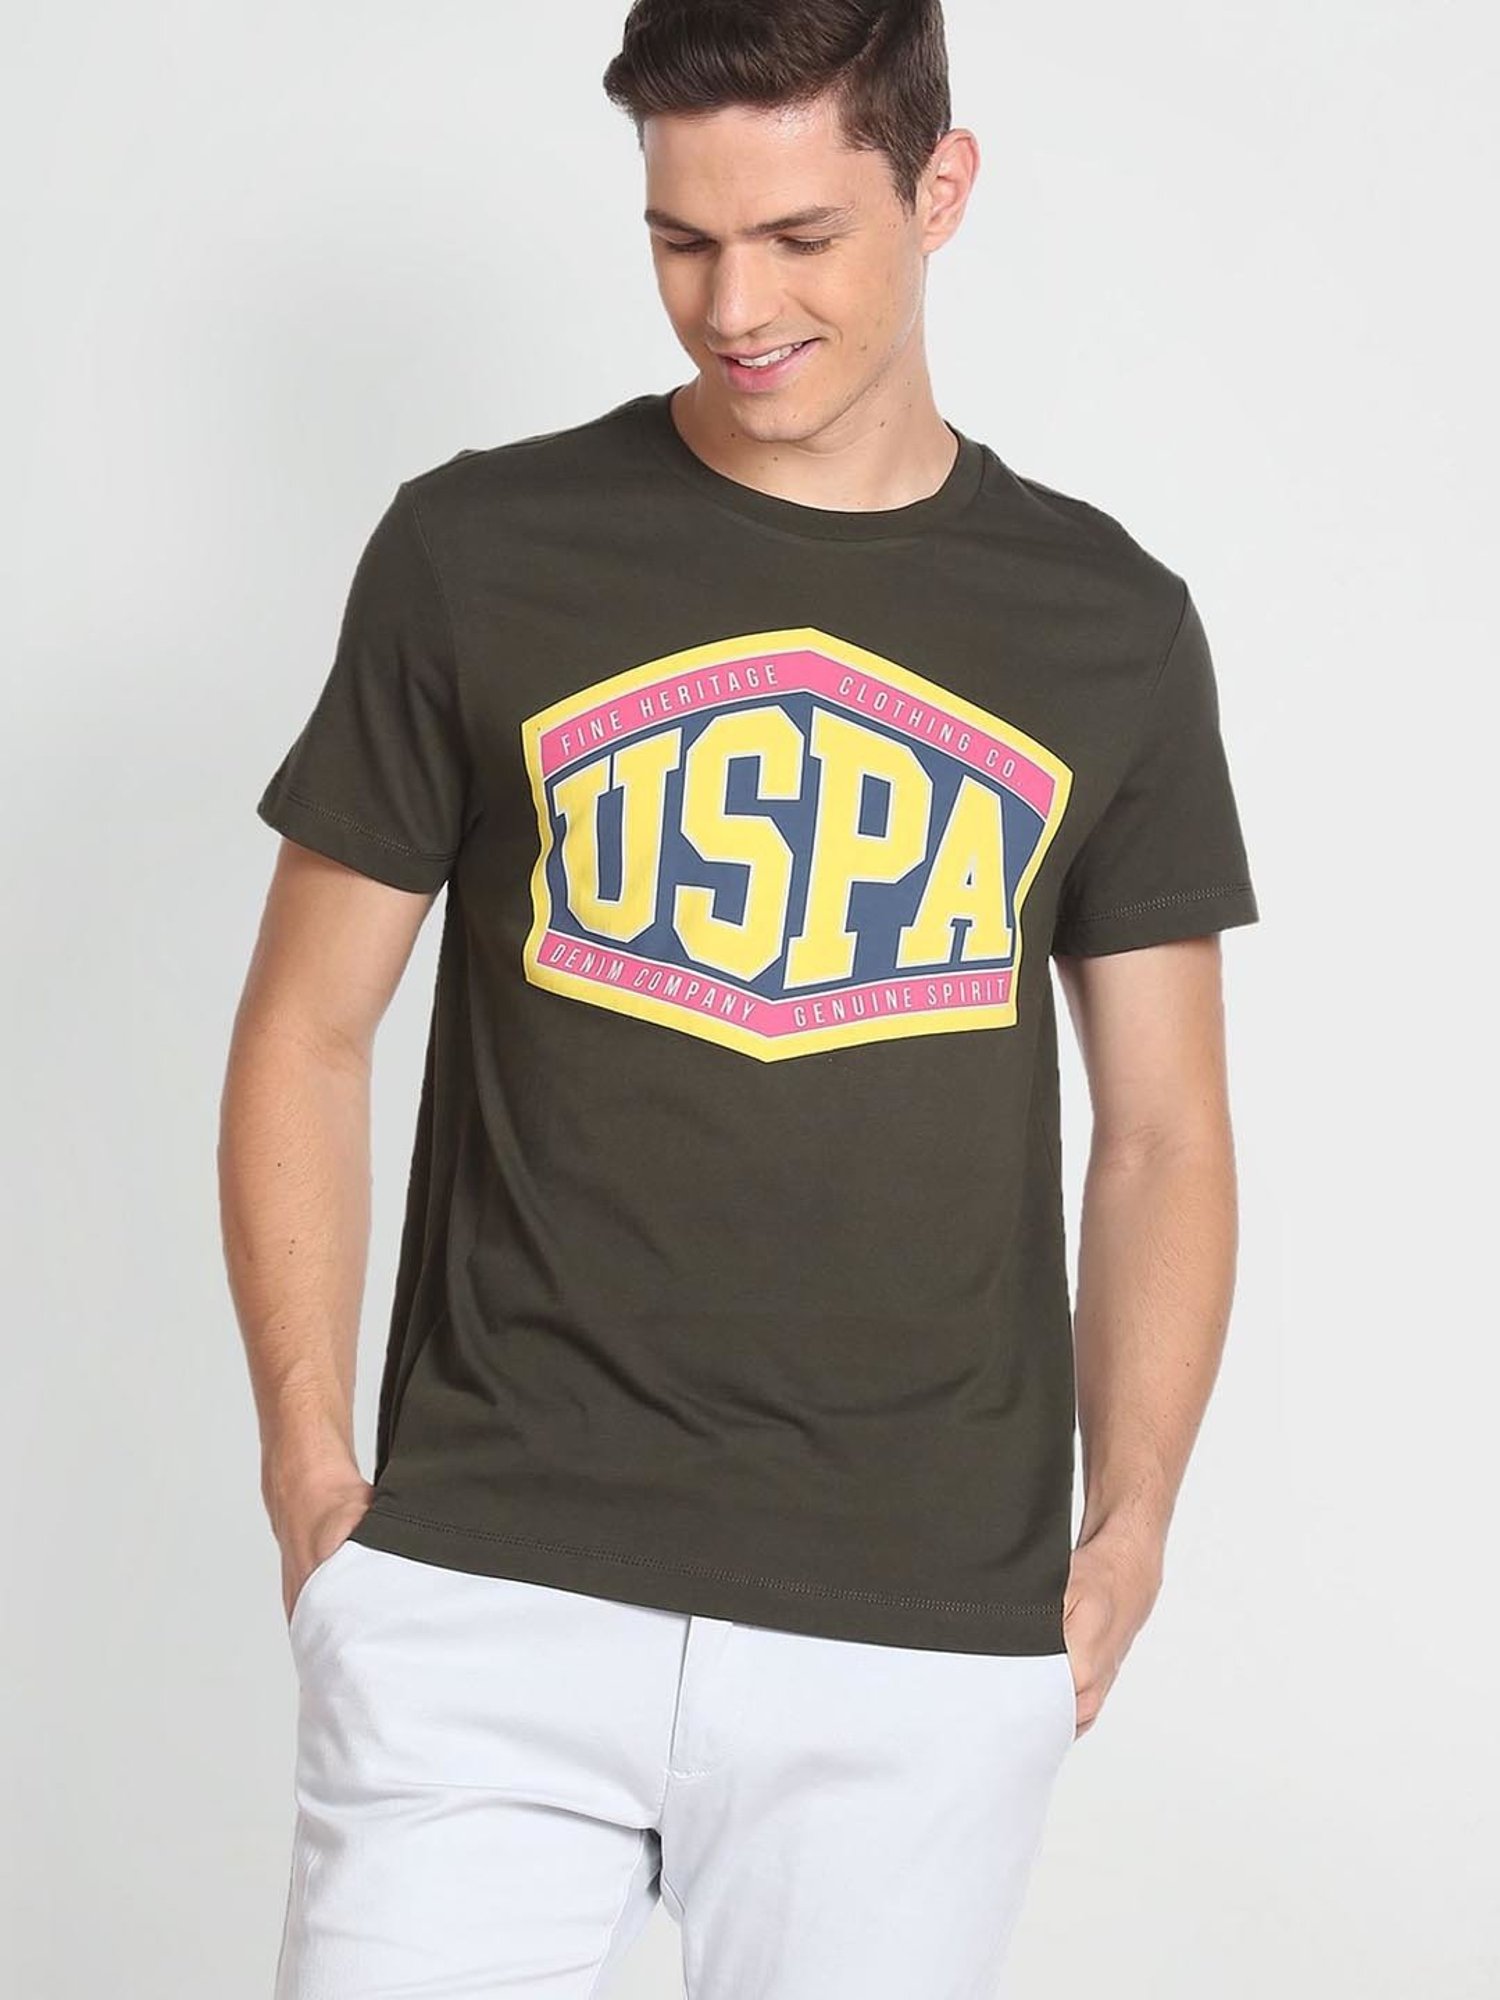 U.S. POLO ASSN. Boys Crew Neck Printed T-Shirt Dark Green, 36T in Solapur  at best price by Umama Fashion - Justdial